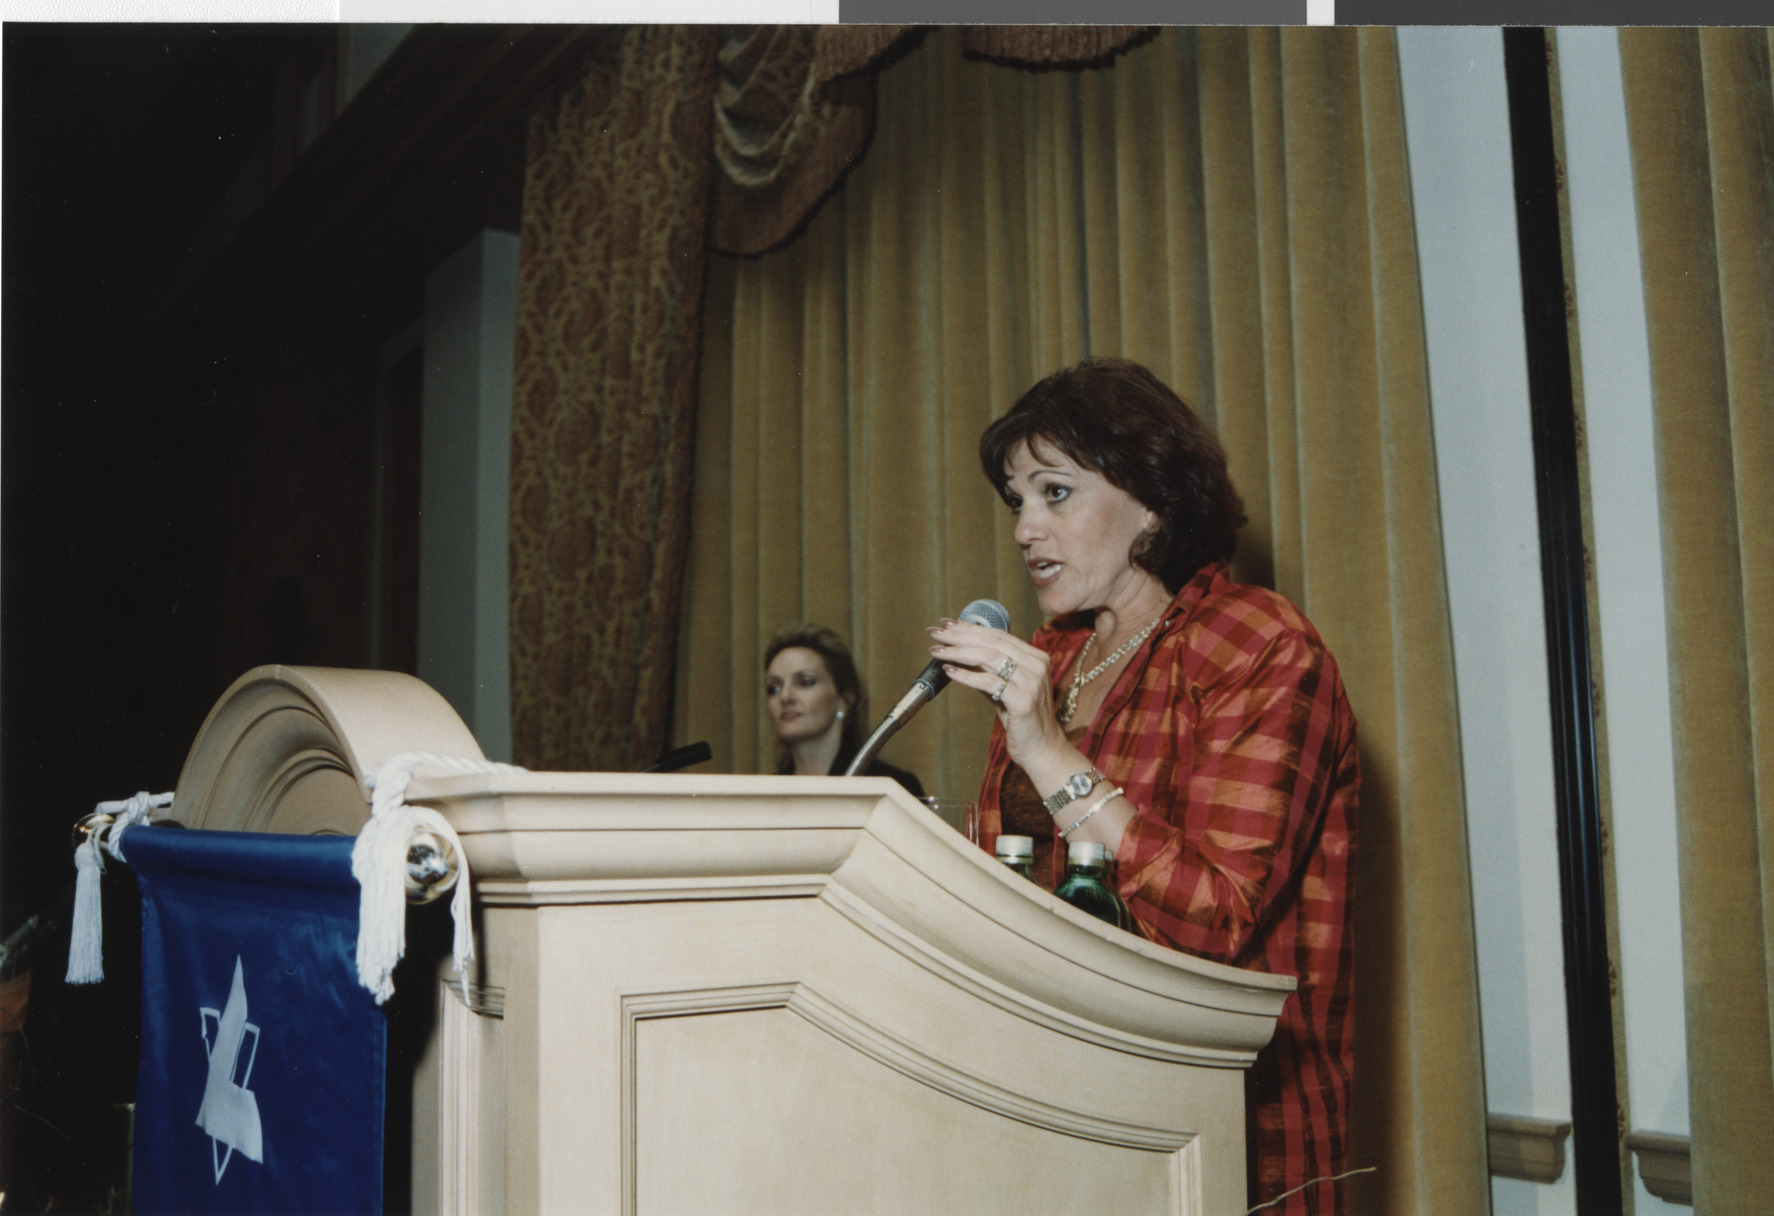 Photographs of Jewish Federation of Las Vegas Main Event Luncheon Event, 2001